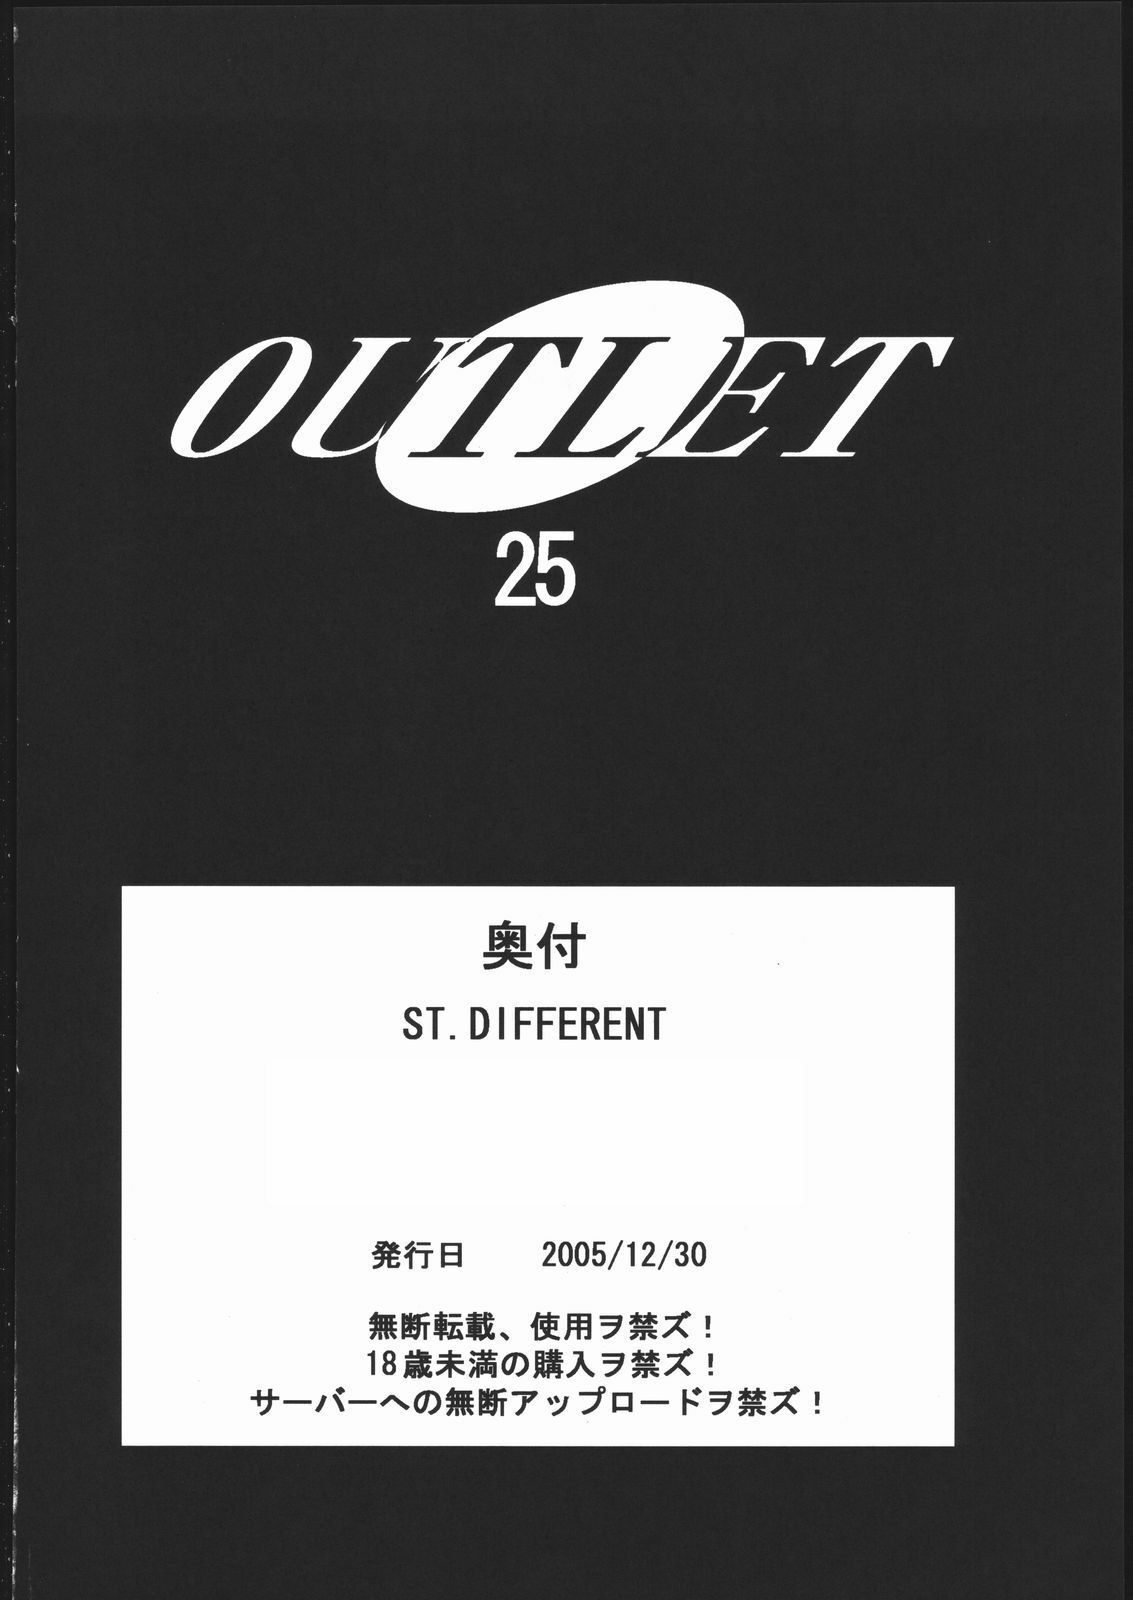 (C69) [ST.DIFFERENT (Various)] OUTLET 25 (Mai-Otome) page 53 full